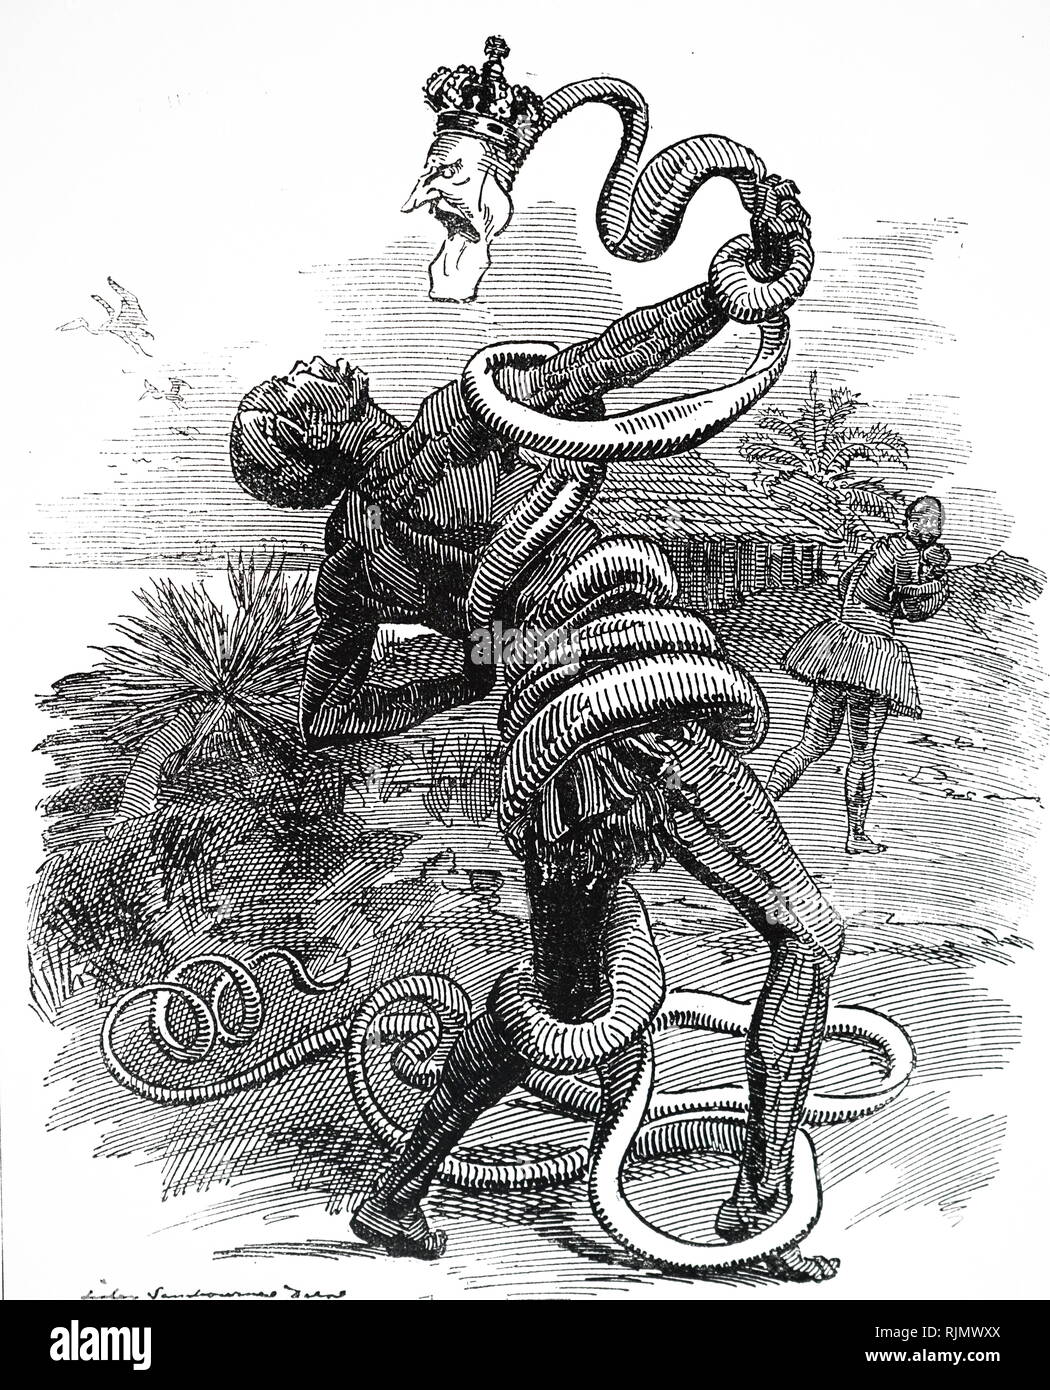 Cartoon from Punch, 1906, showing Leopold II of Belgium (1835-1909), squeezing his subjects in the Congo Free State (now Democratic Republic of Congo) to death. After exposure of exploitation of local labour, in 1908 Belgium annexed the territory and conditions improved slightly from when it was under Leopold י s personal rule and it was known as the Belgian Congo until independence. Stock Photo